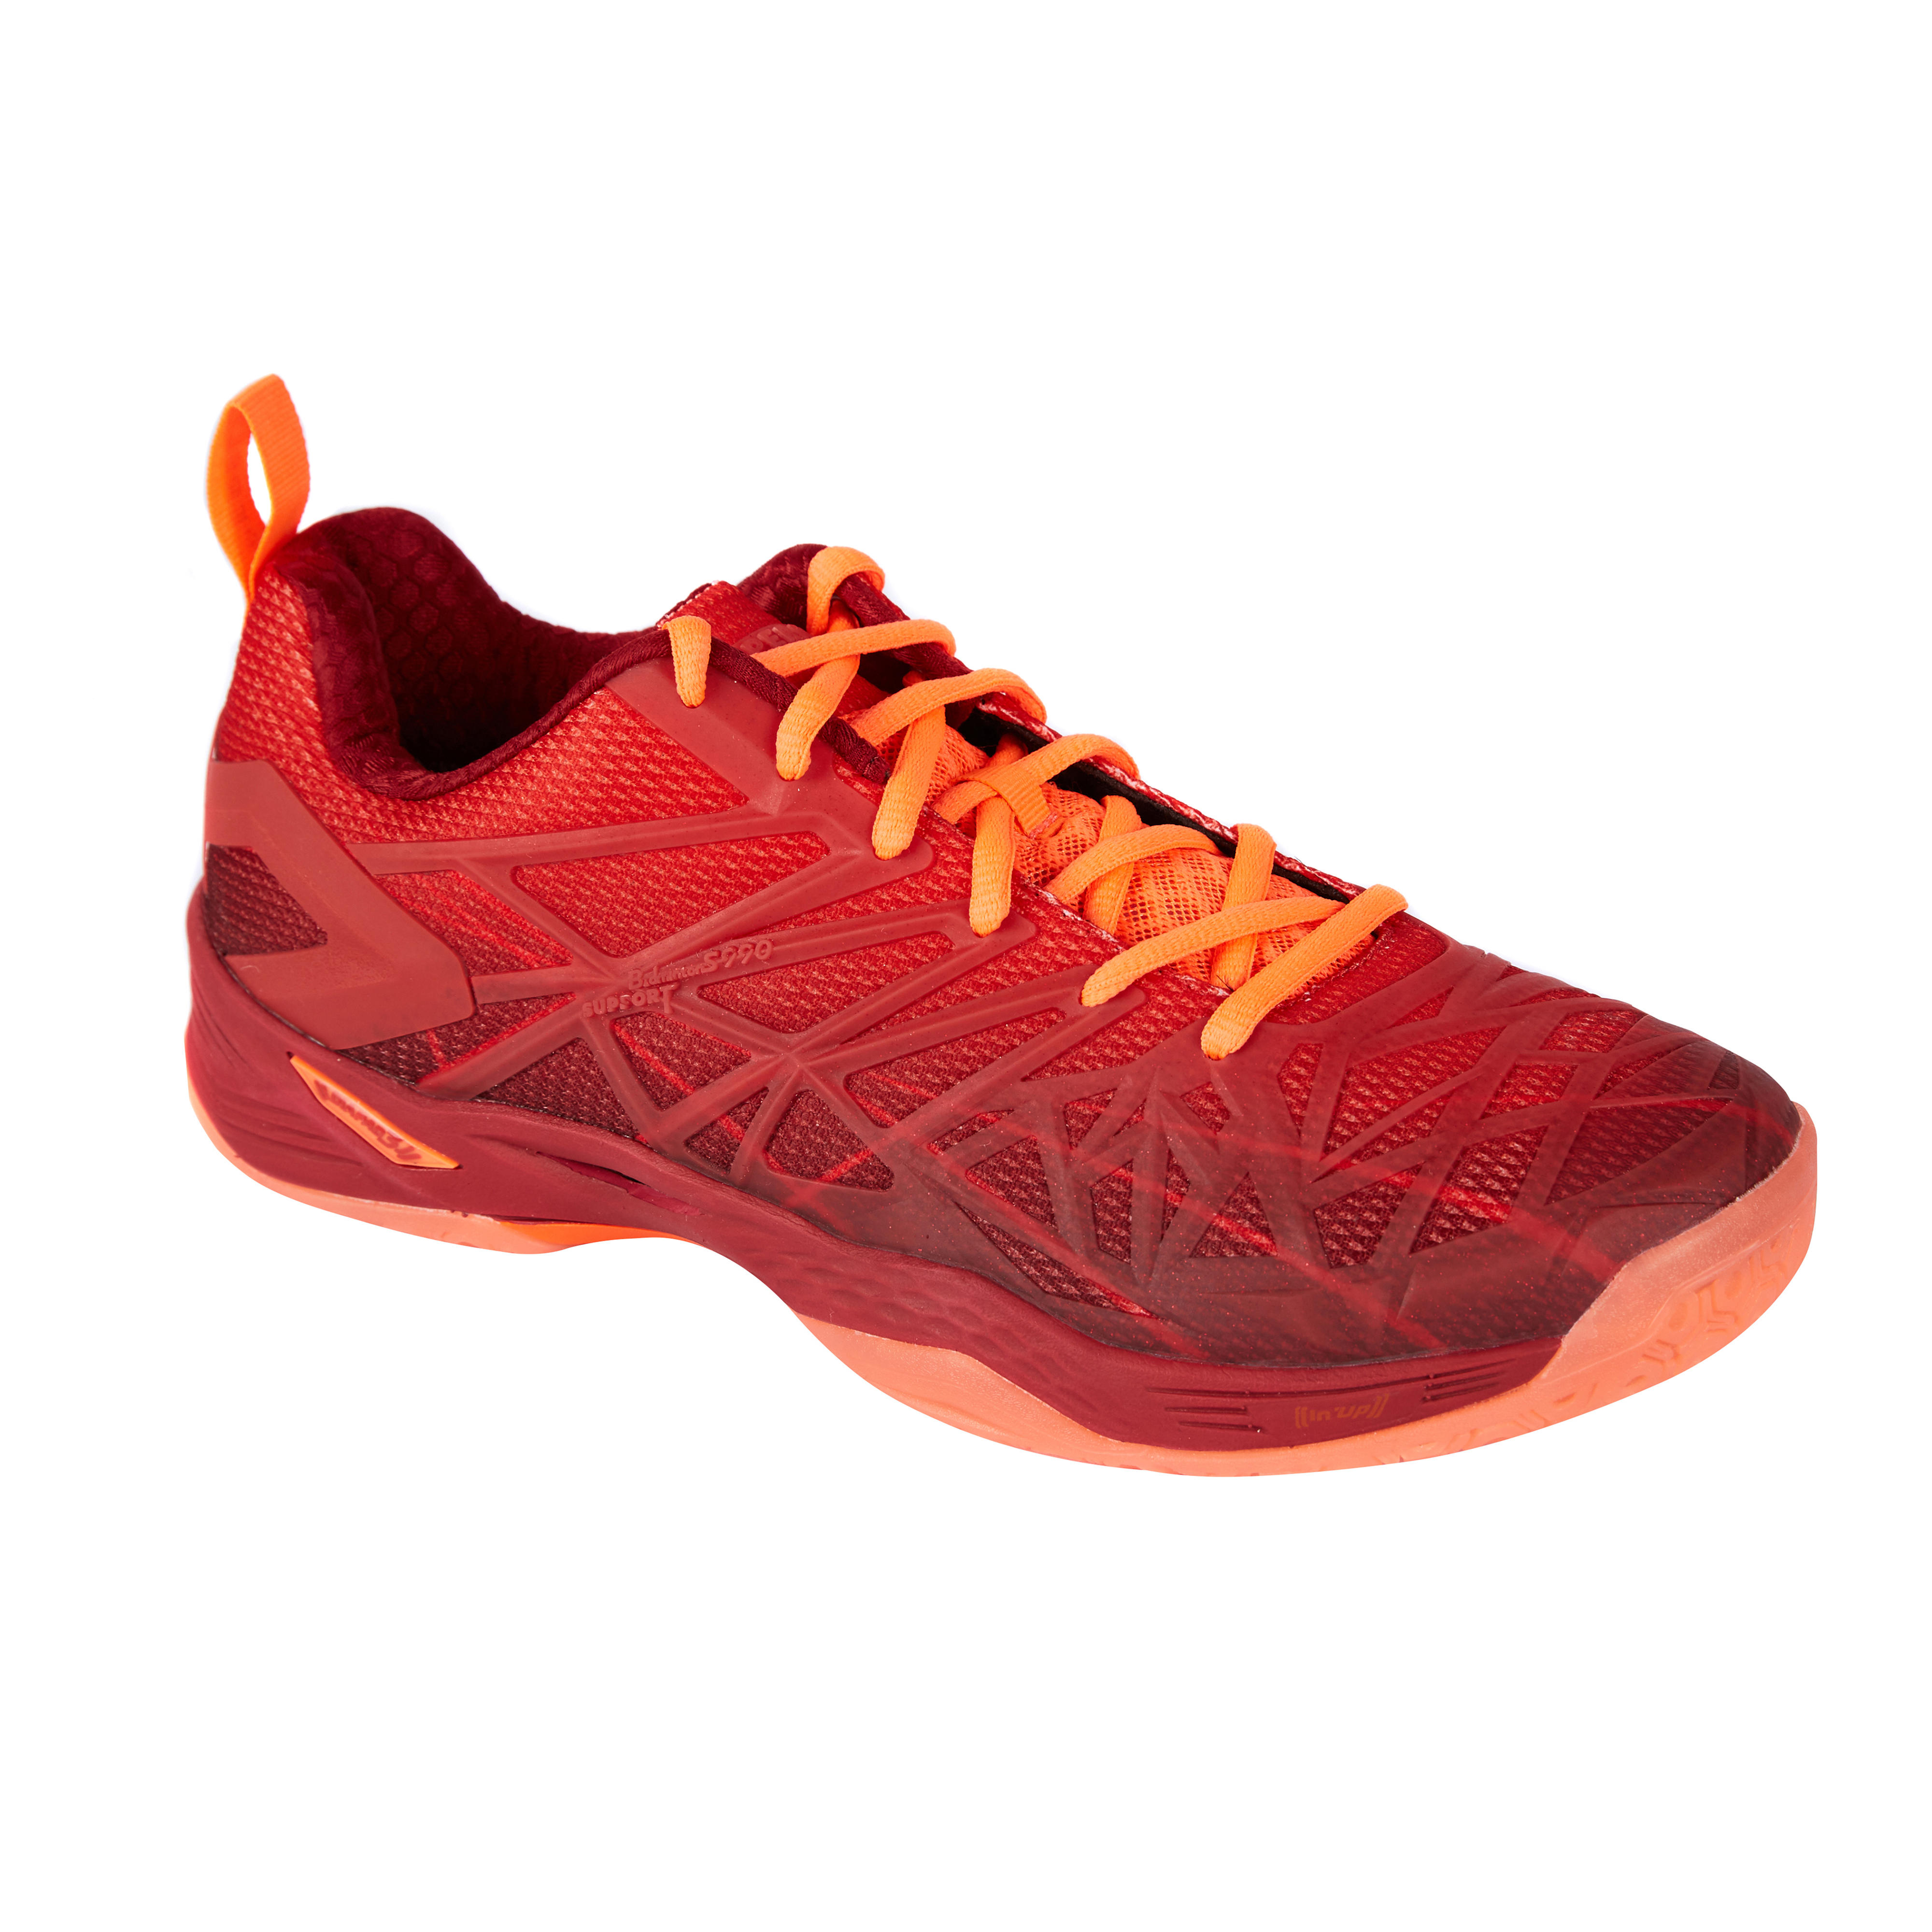 perfly badminton shoes